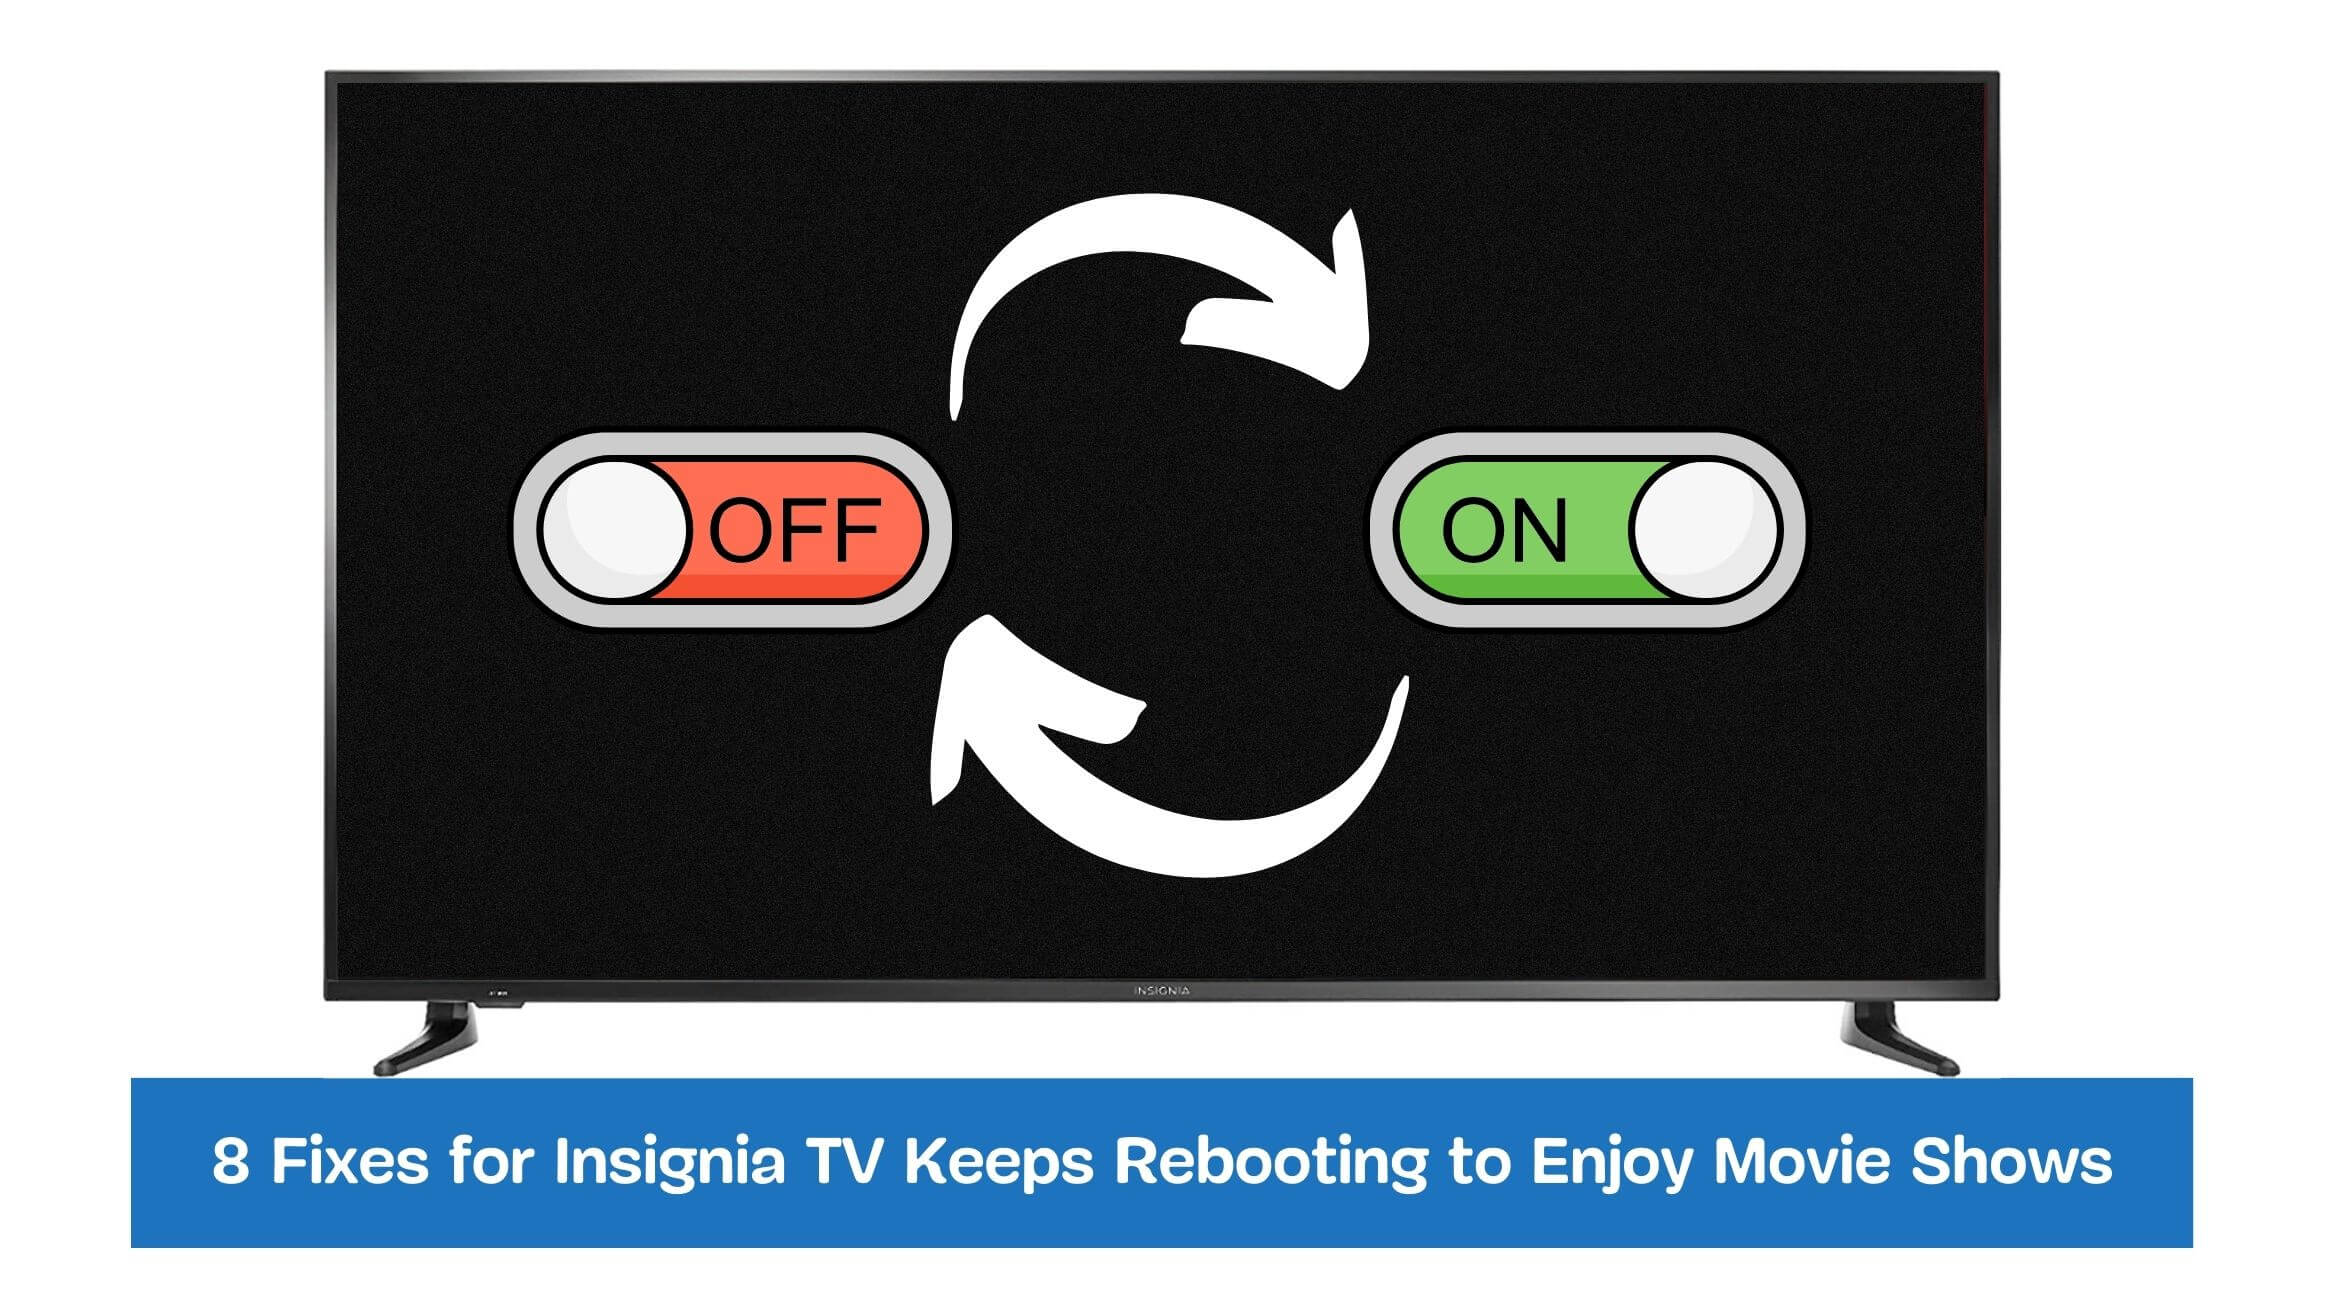 8 Fixes for Insignia TV Keeps Rebooting to Enjoy Movie Shows